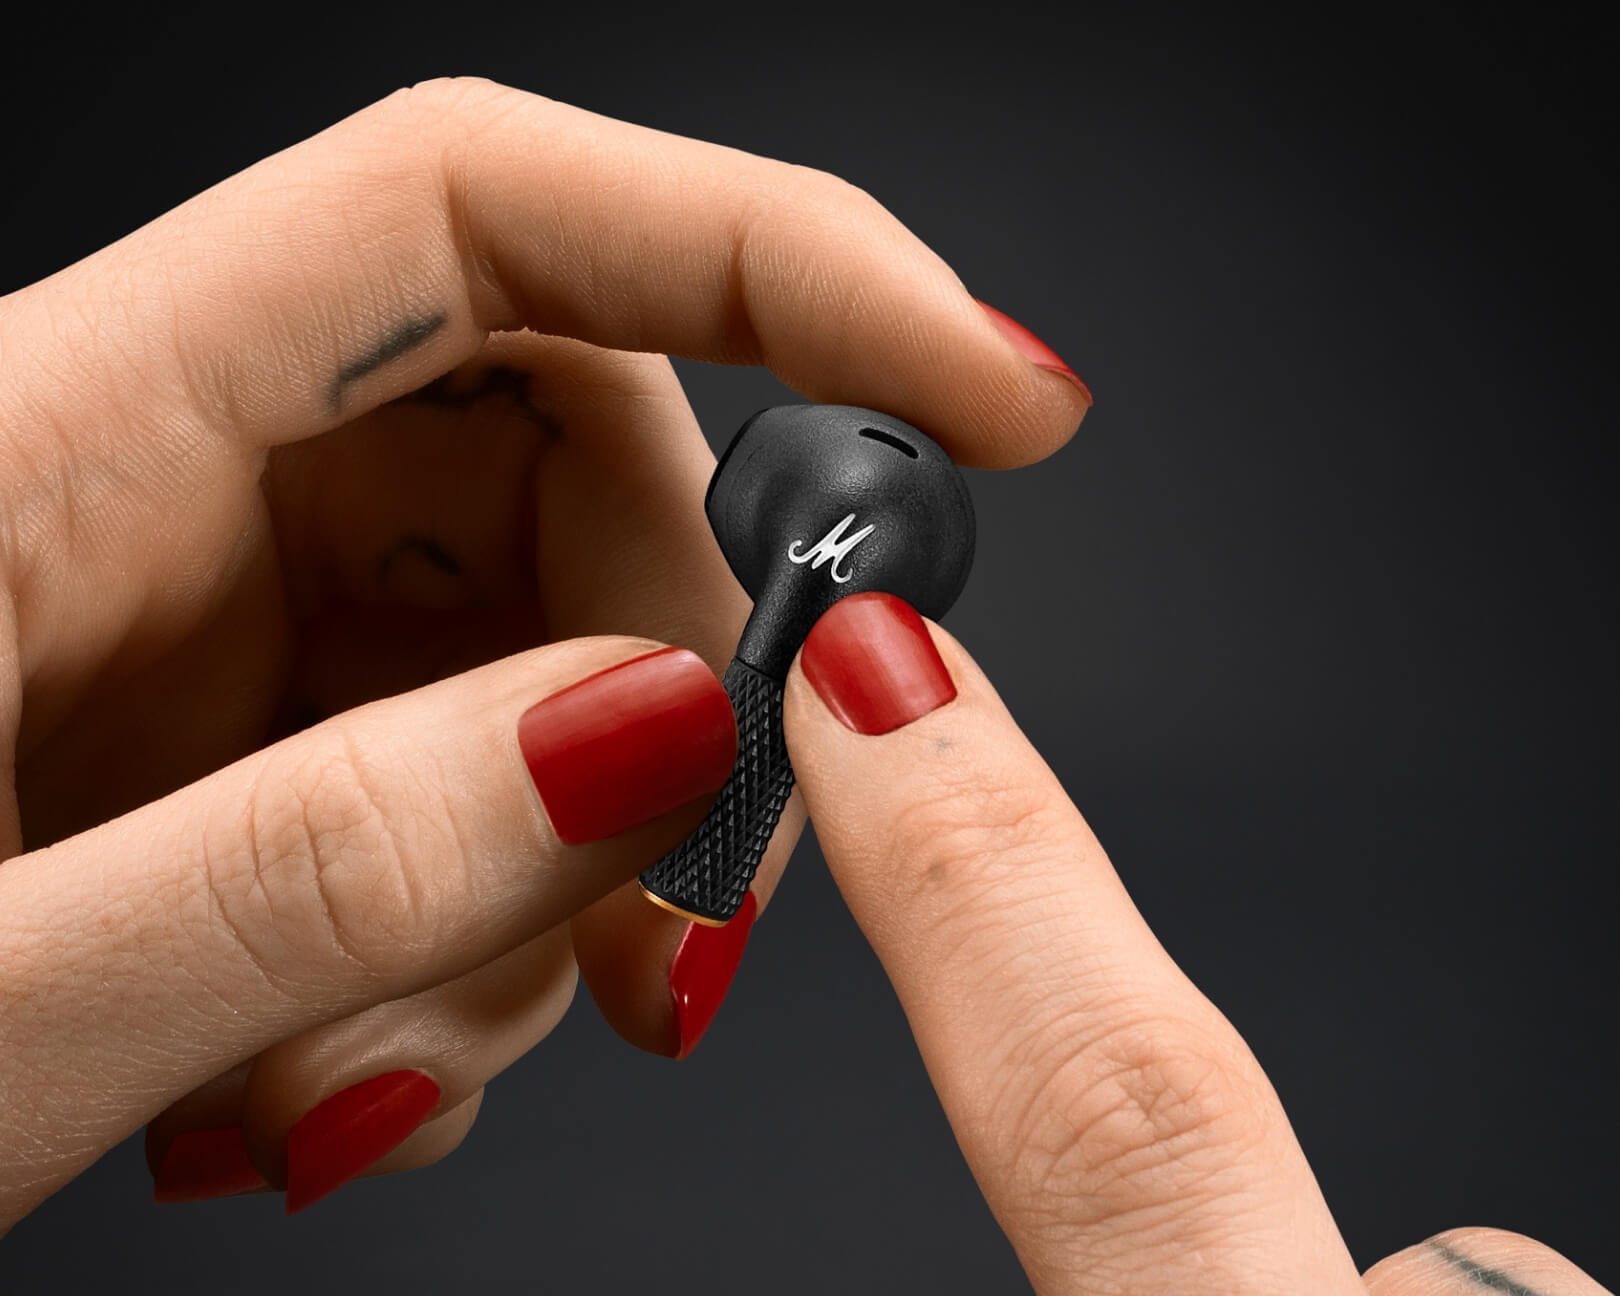 Minor III earbuds with charging case